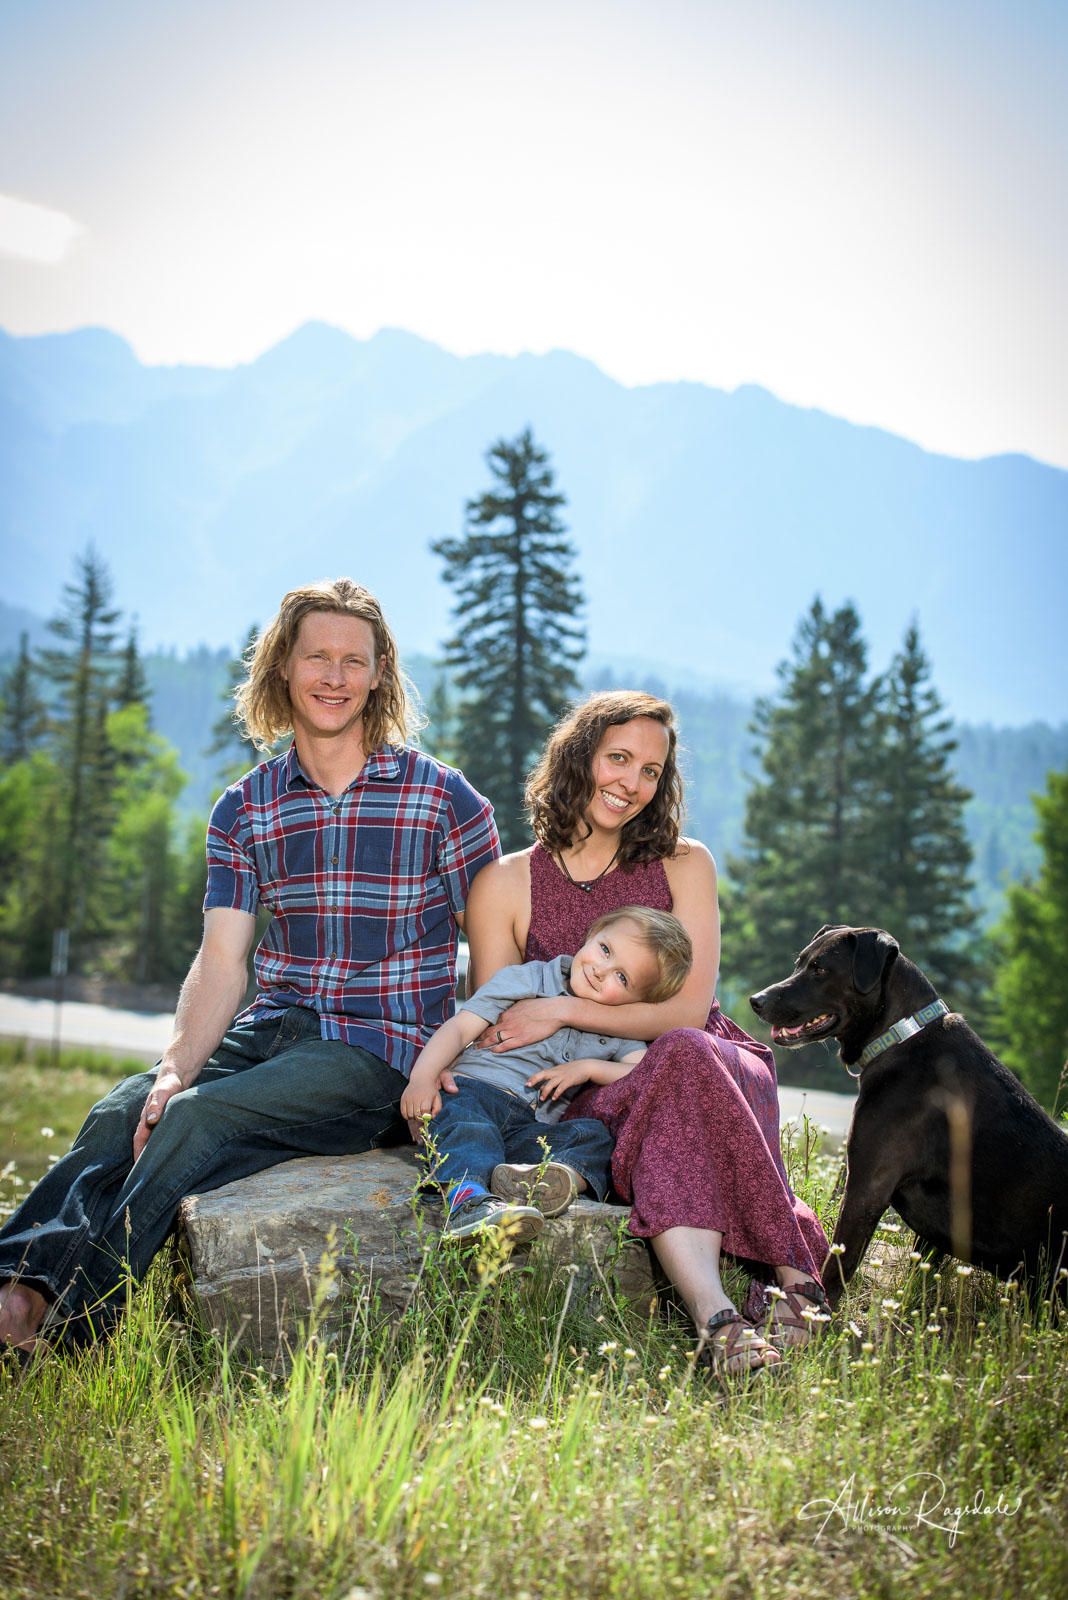 beautiful and unique family portraits in Durango Colorado by Allison Ragsdale Photography 